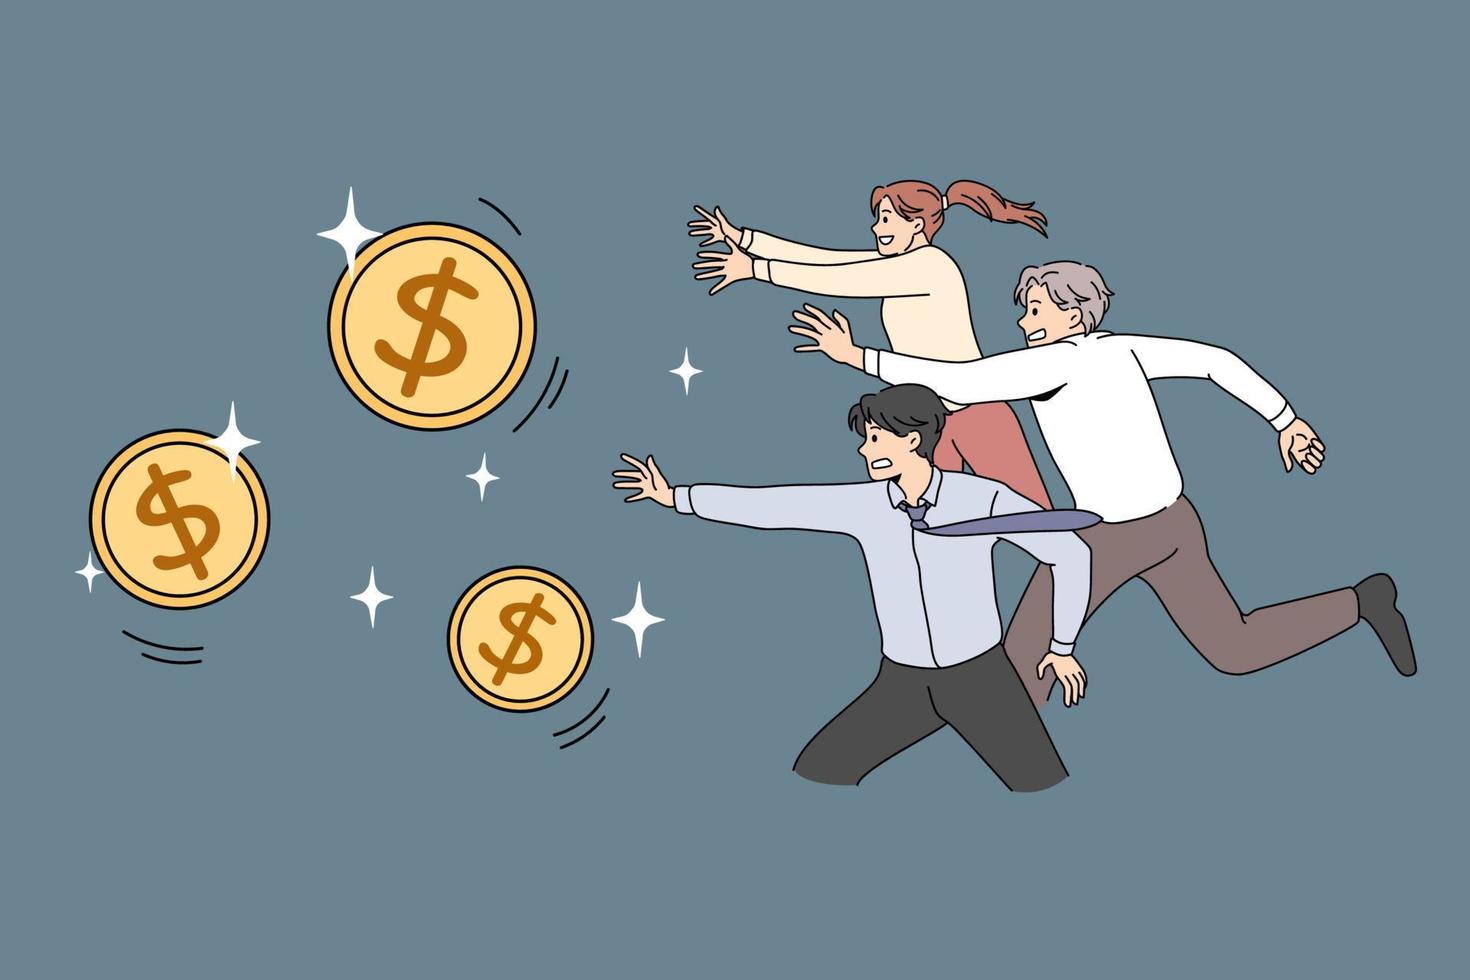 Human money competition concept. Greed for wealthy life. Vector illustration of running people for golden dollar coins.